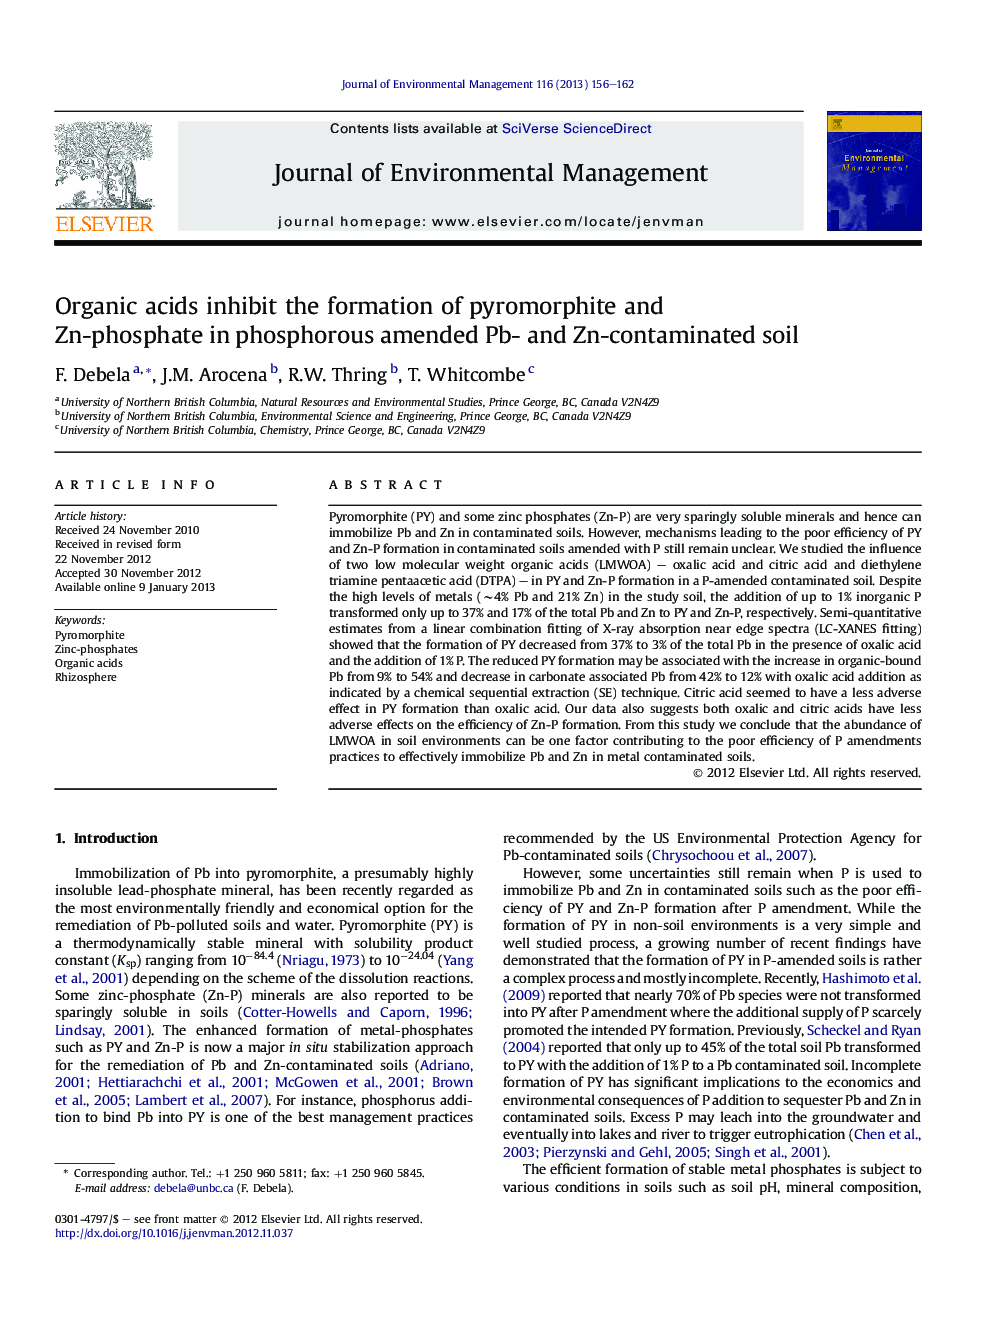 Organic acids inhibit the formation of pyromorphite and Zn-phosphate in phosphorous amended Pb- and Zn-contaminated soil